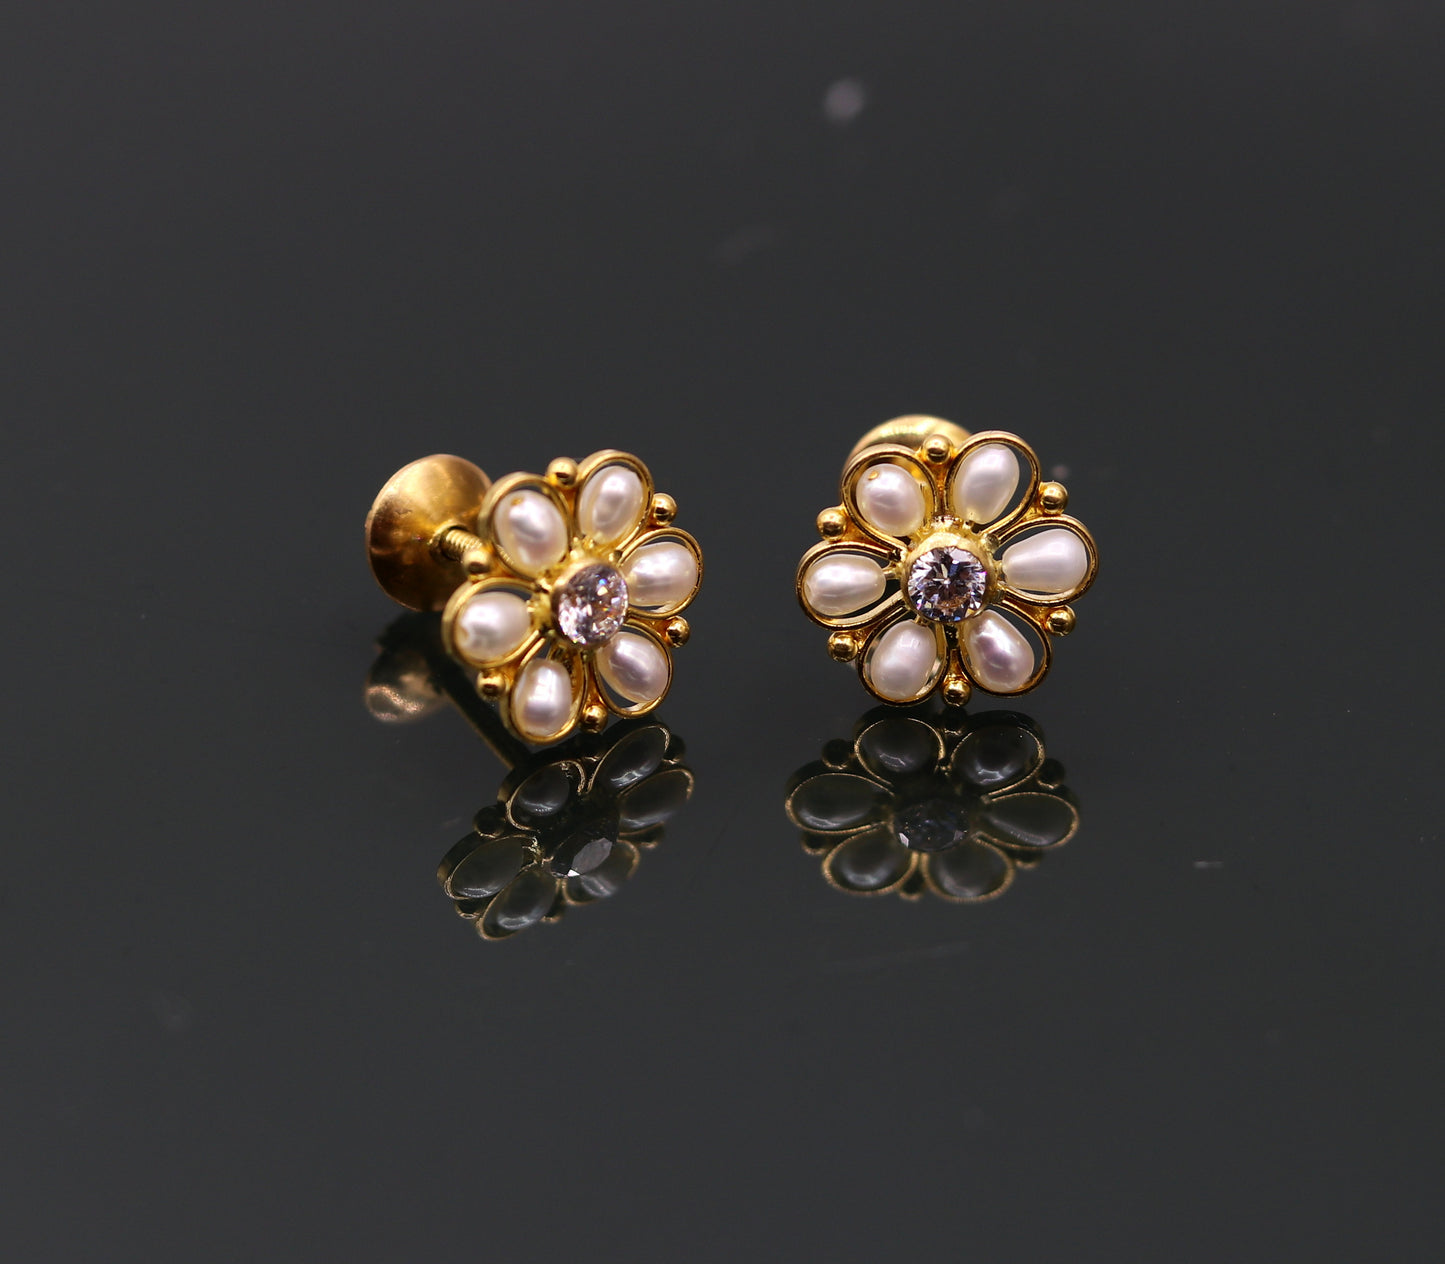 22kt yellow gold handmade stud earrings with fabulous pearl and cubic zircon earrings stylish modern girl's jewelry from india belly dance - TRIBAL ORNAMENTS